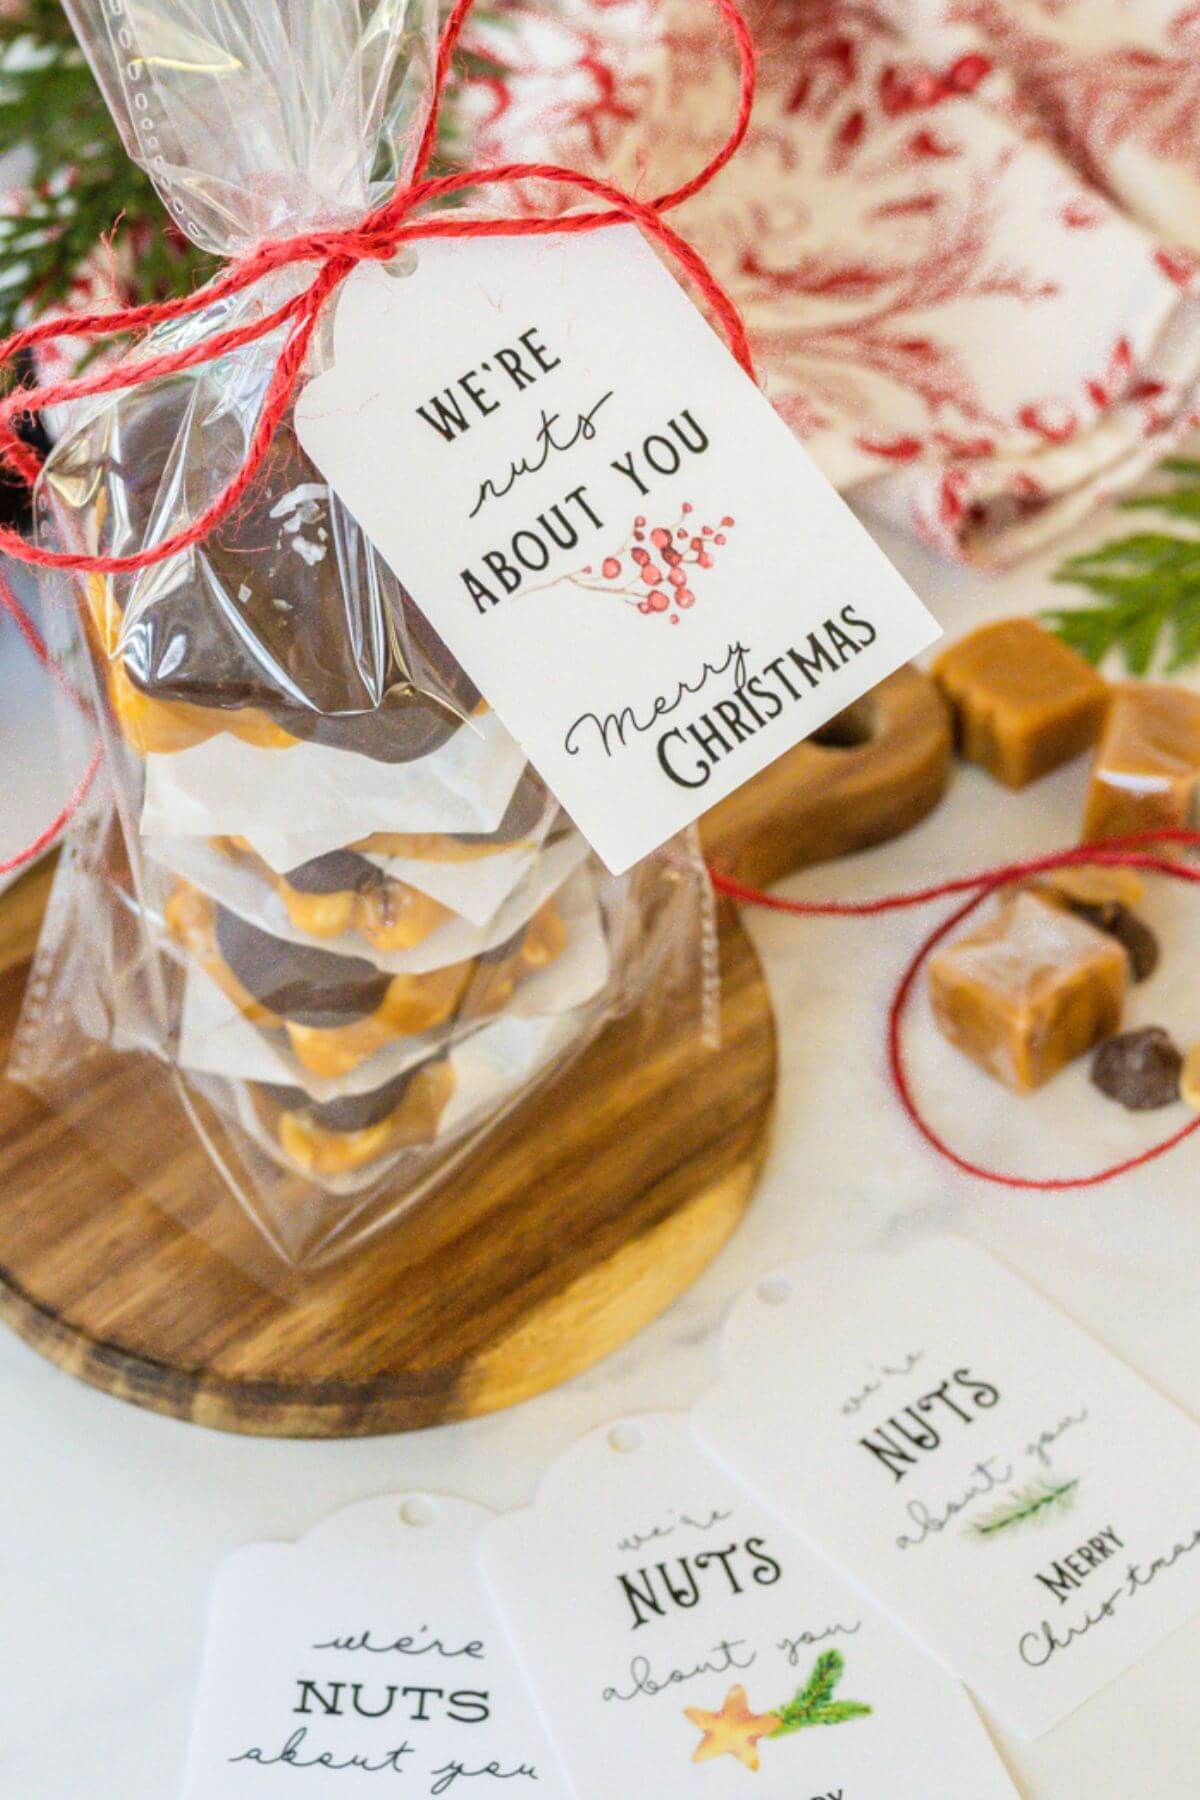 A clear gift bag showing the clusters is wrapped with holiday ribbon and tag that says, "We're nuts about you, Merry Christmas."